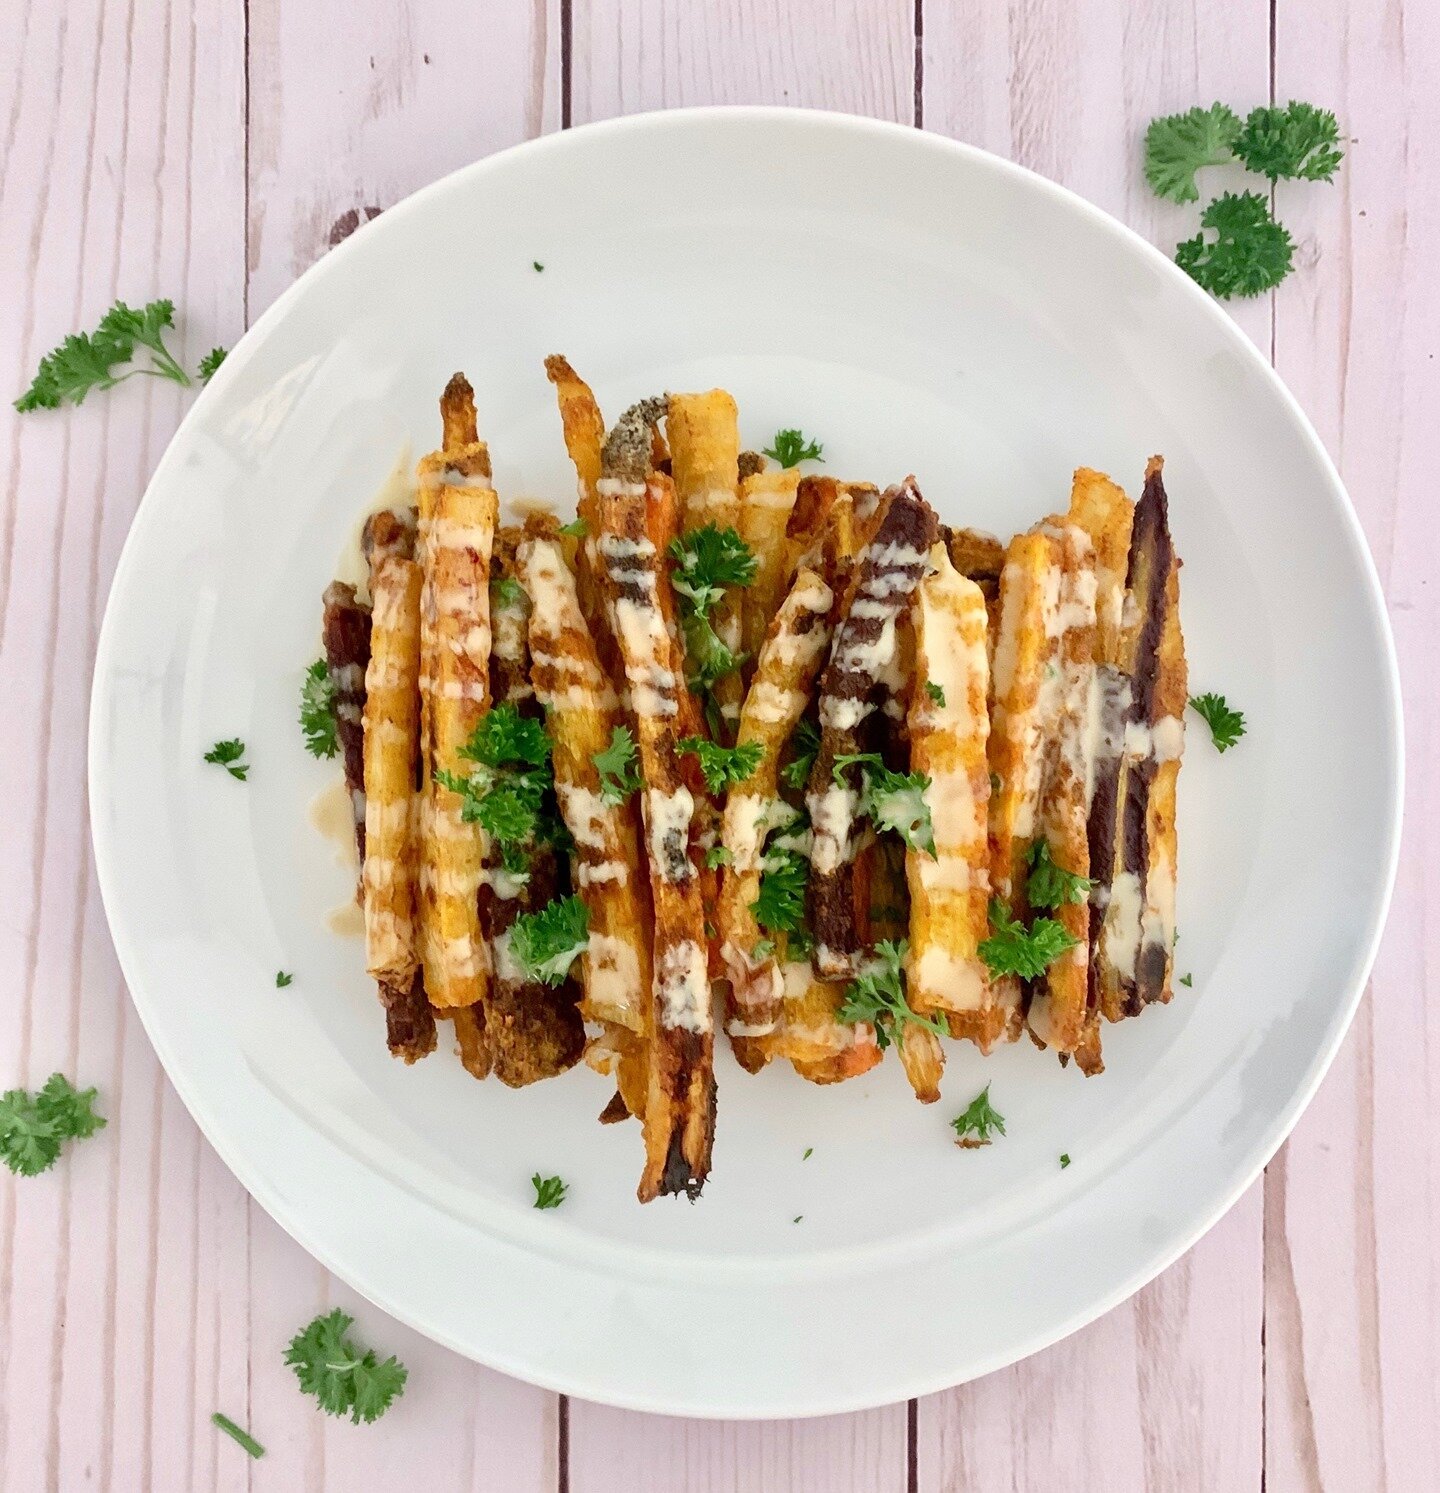 Carrot Fries... I know but,⁠
⁠
TRY them! I make these almost every week and @loserangeles likes them so that says something! #eatsbylulu Thanks @earthyandy for the inspo!⁠
⁠
Carrot Fries //⁠
cut carrots into skinny long pieces. Place them in a bowl a